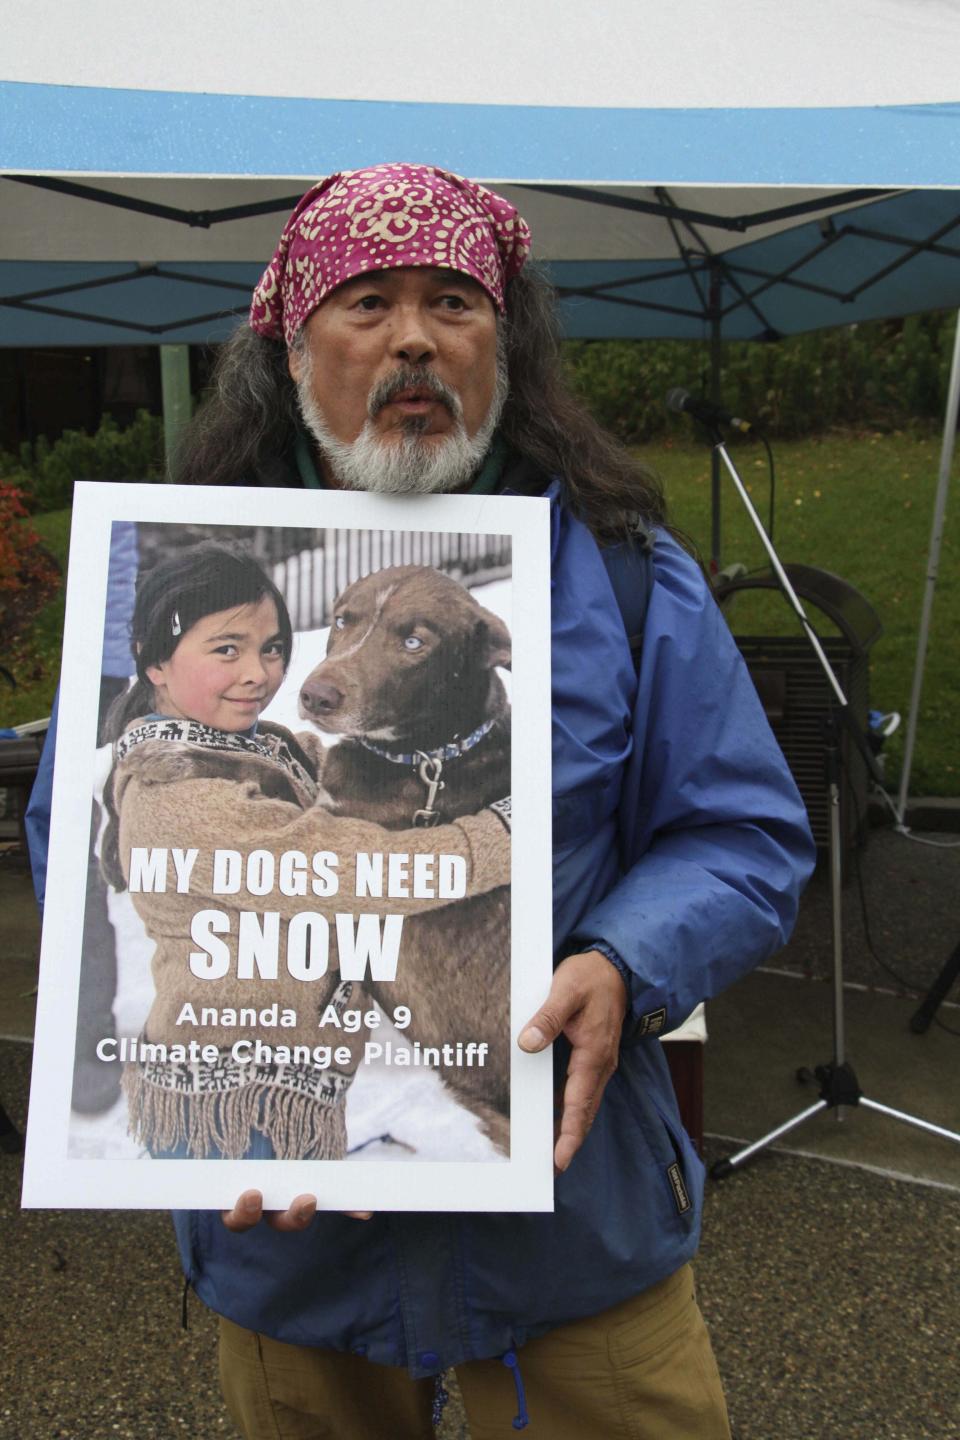 FILE - Dune Lankard of Cordova, Alaska, holds a sign showing his daughter, Ananda Rose, a budding musher, outside Boney Courthouse in Anchorage, Alaska, on Oct. 9, 2019. Ananda Rose is one of 16 Alaska youths who in 2017 sued the state, claiming that human-caused greenhouse gas emission leading to climate change is creating long-term, dangerous health effects. The Alaska Supreme Court on Friday, Jan. 28, 2022, upheld the dismissal of a lawsuit filed by the youths, who claimed long-term effects of climate change will devastate Alaska and interfere with their individual constitutional rights. (AP Photo/Mark Thiessen, File)